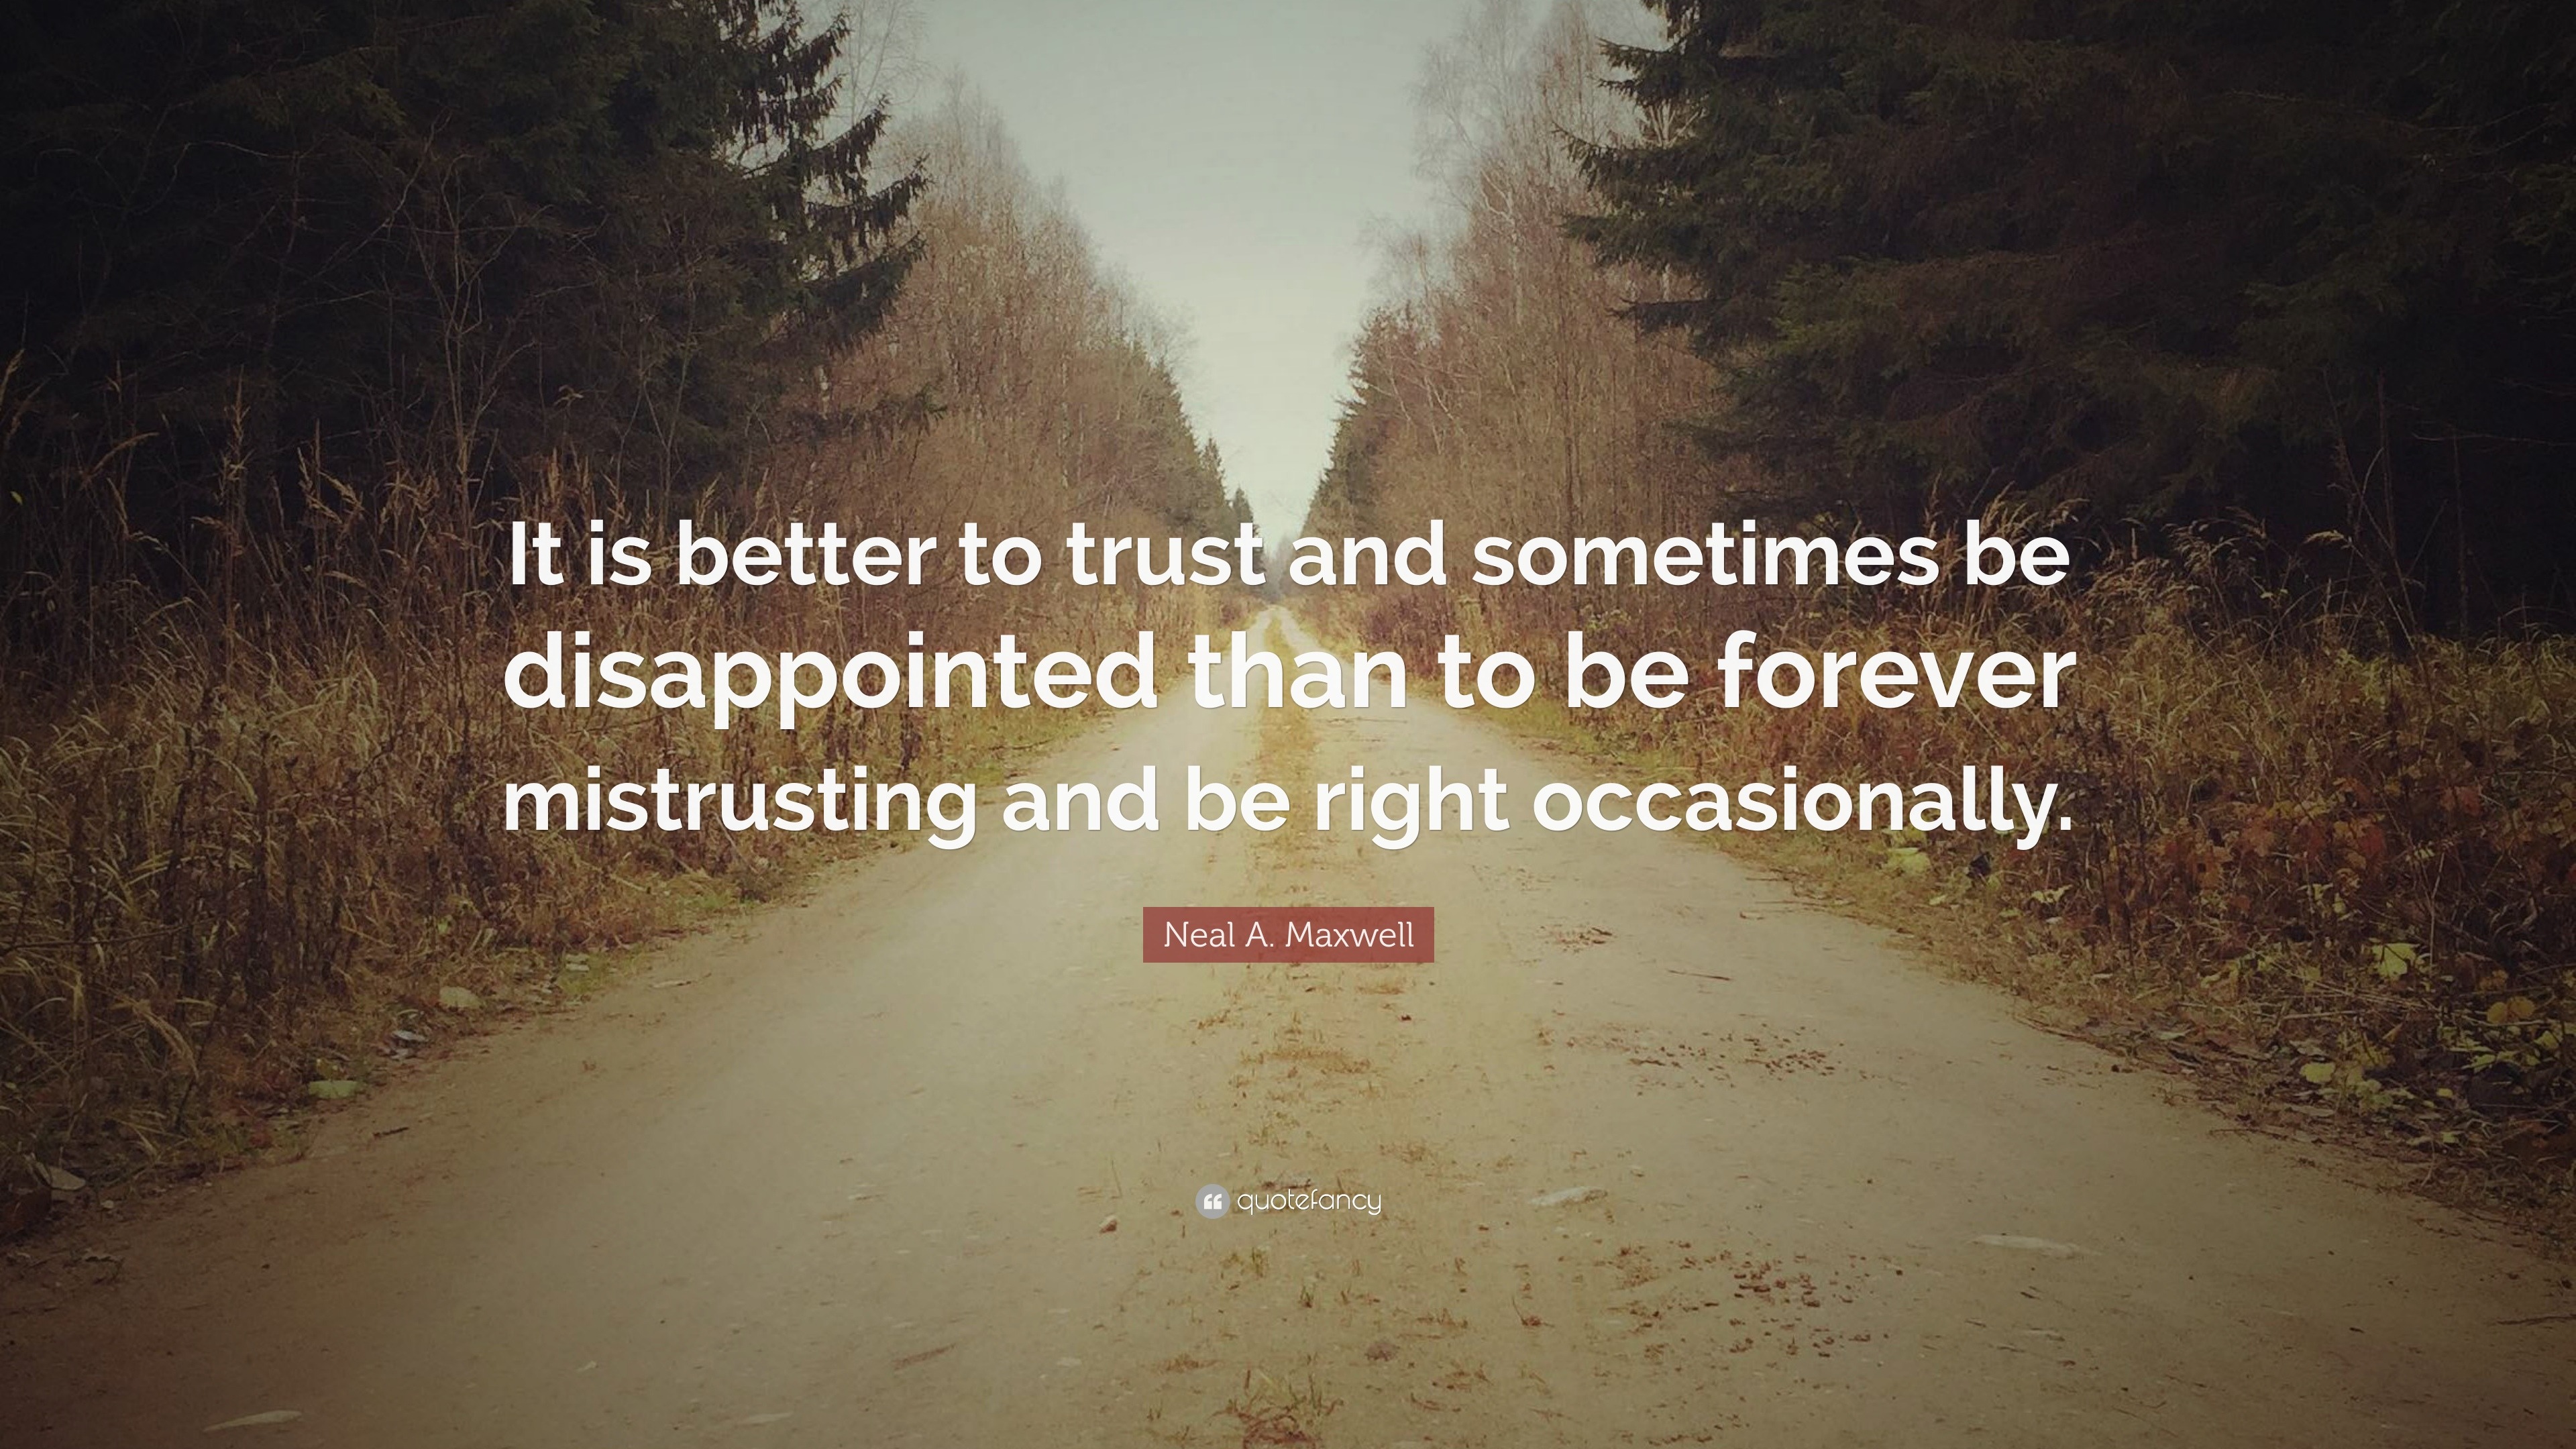 Neal A Maxwell Quote It Is Better To Trust And Sometimes Be Disappointed Than To Be Forever Mistrusting And Be Right Occasionally 12 Wallpapers Quotefancy